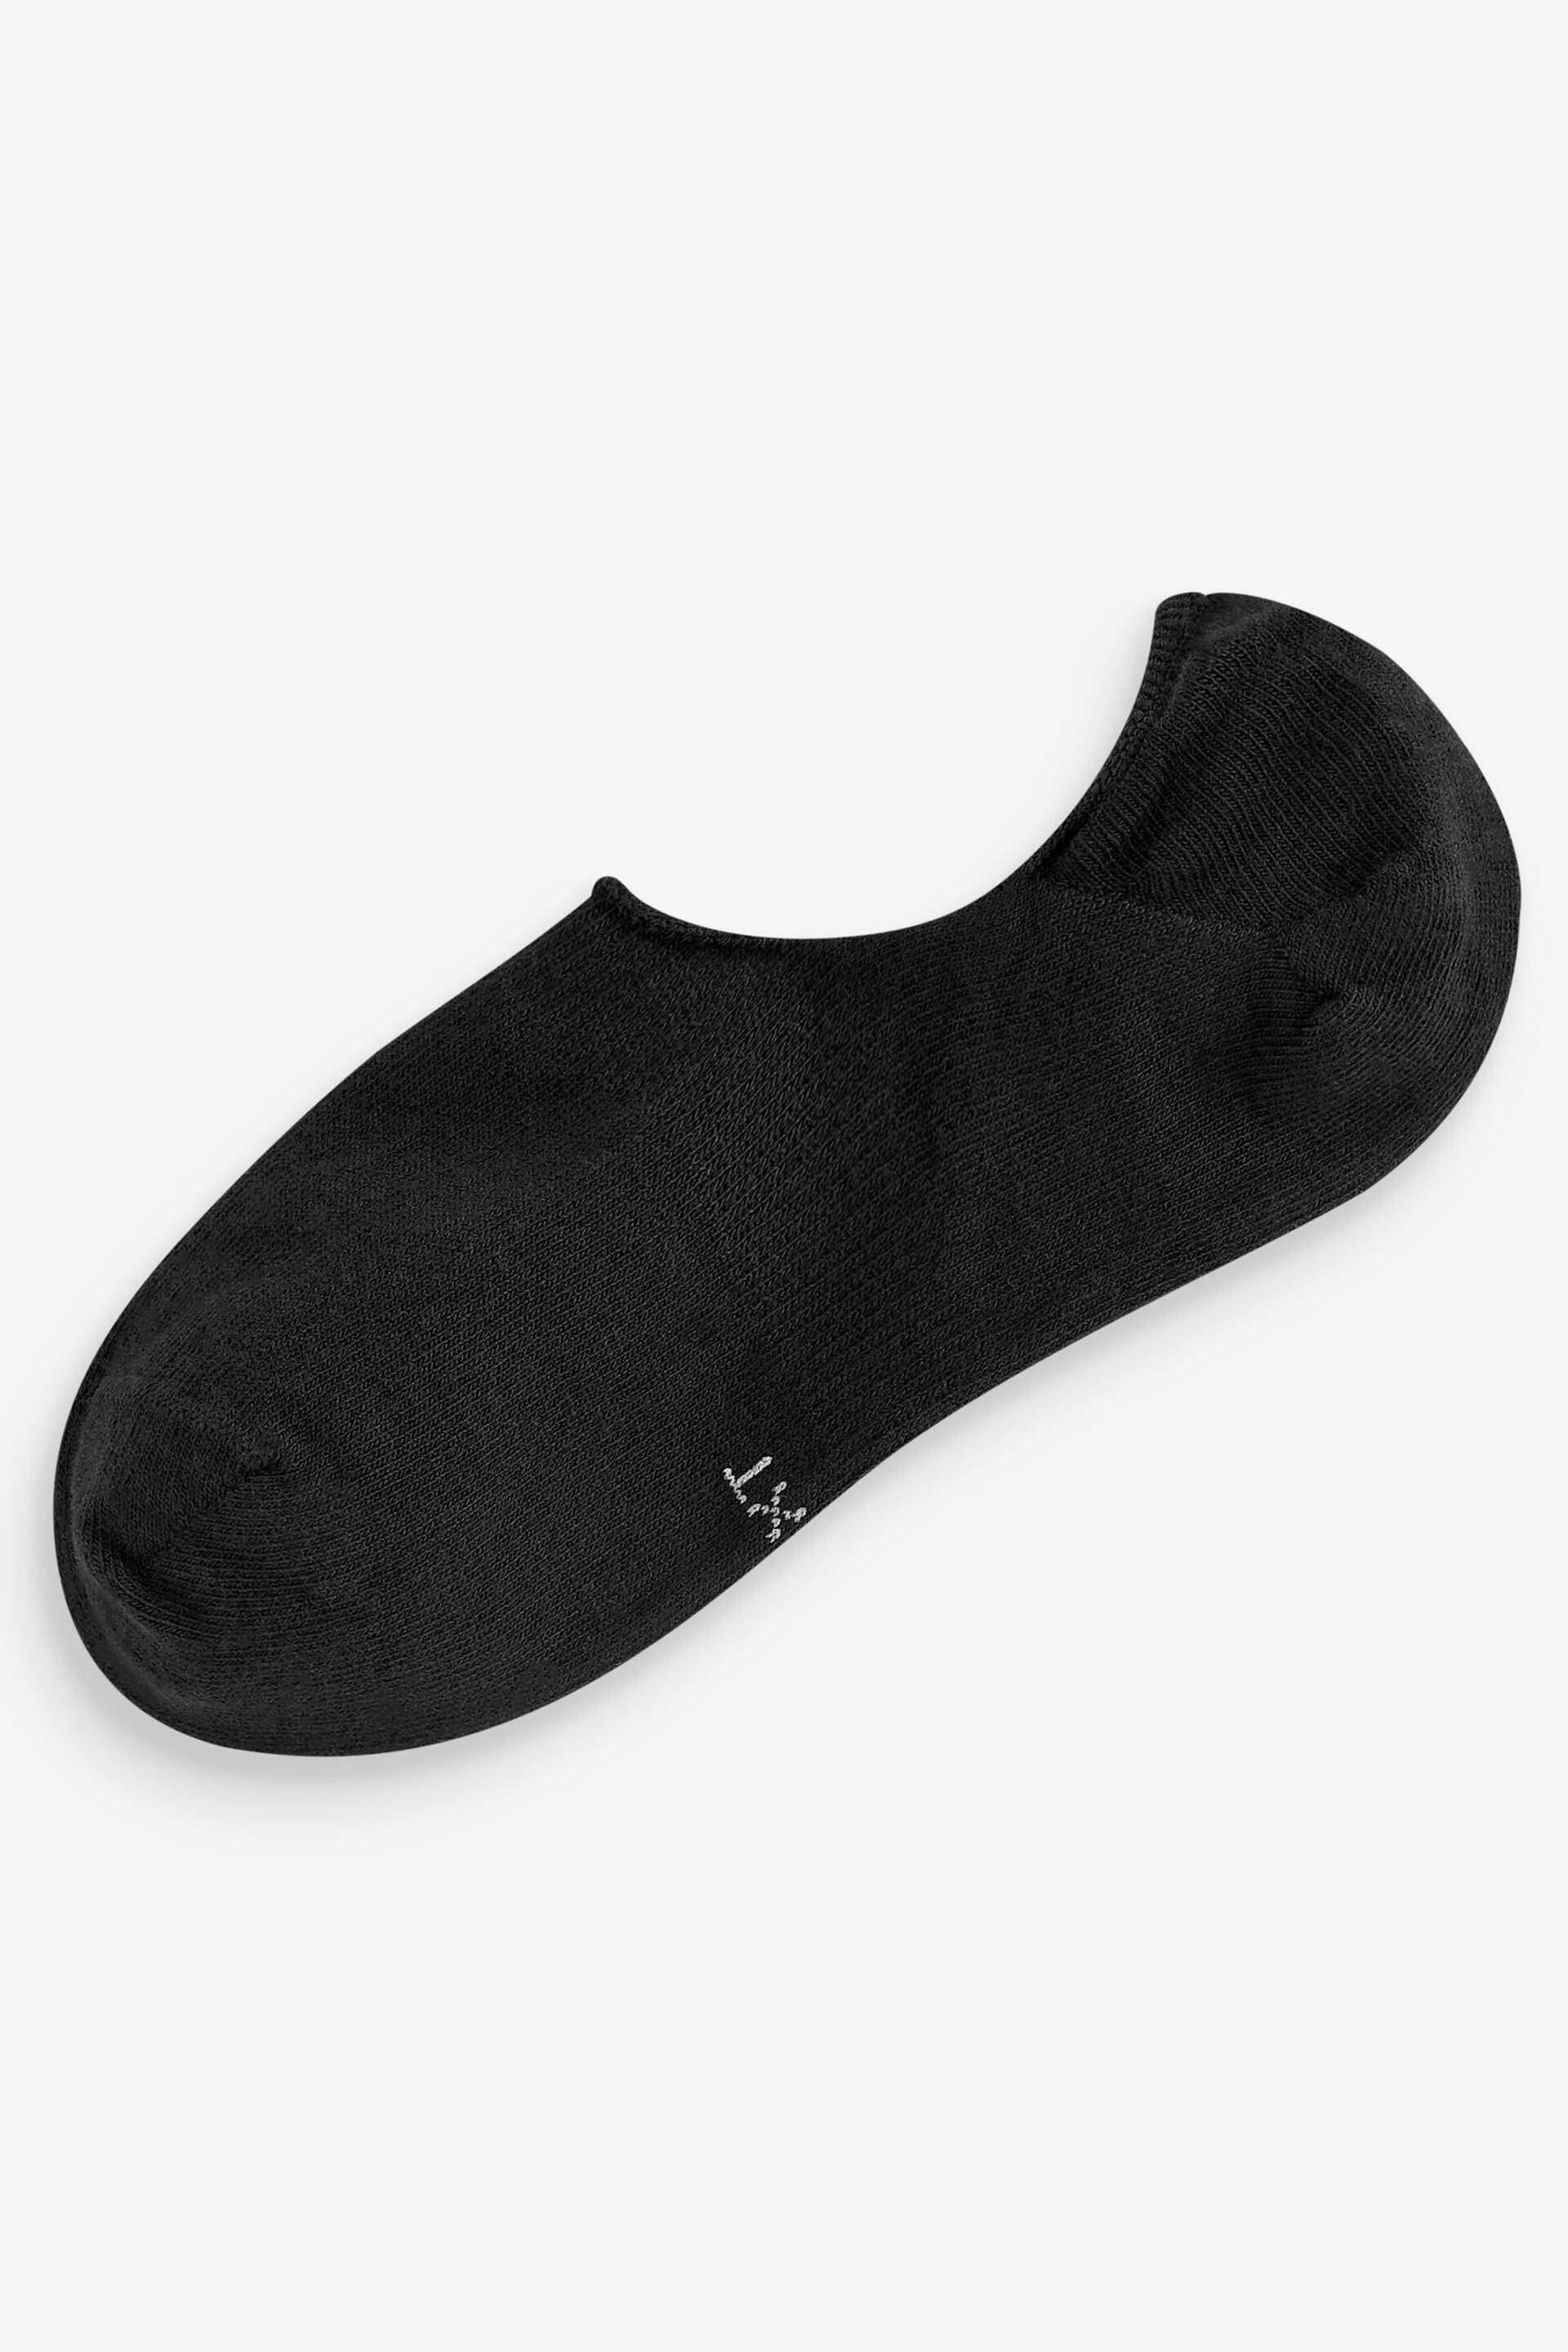 Black 10 Pack Invisible Trainers Socks - Image 3 of 4